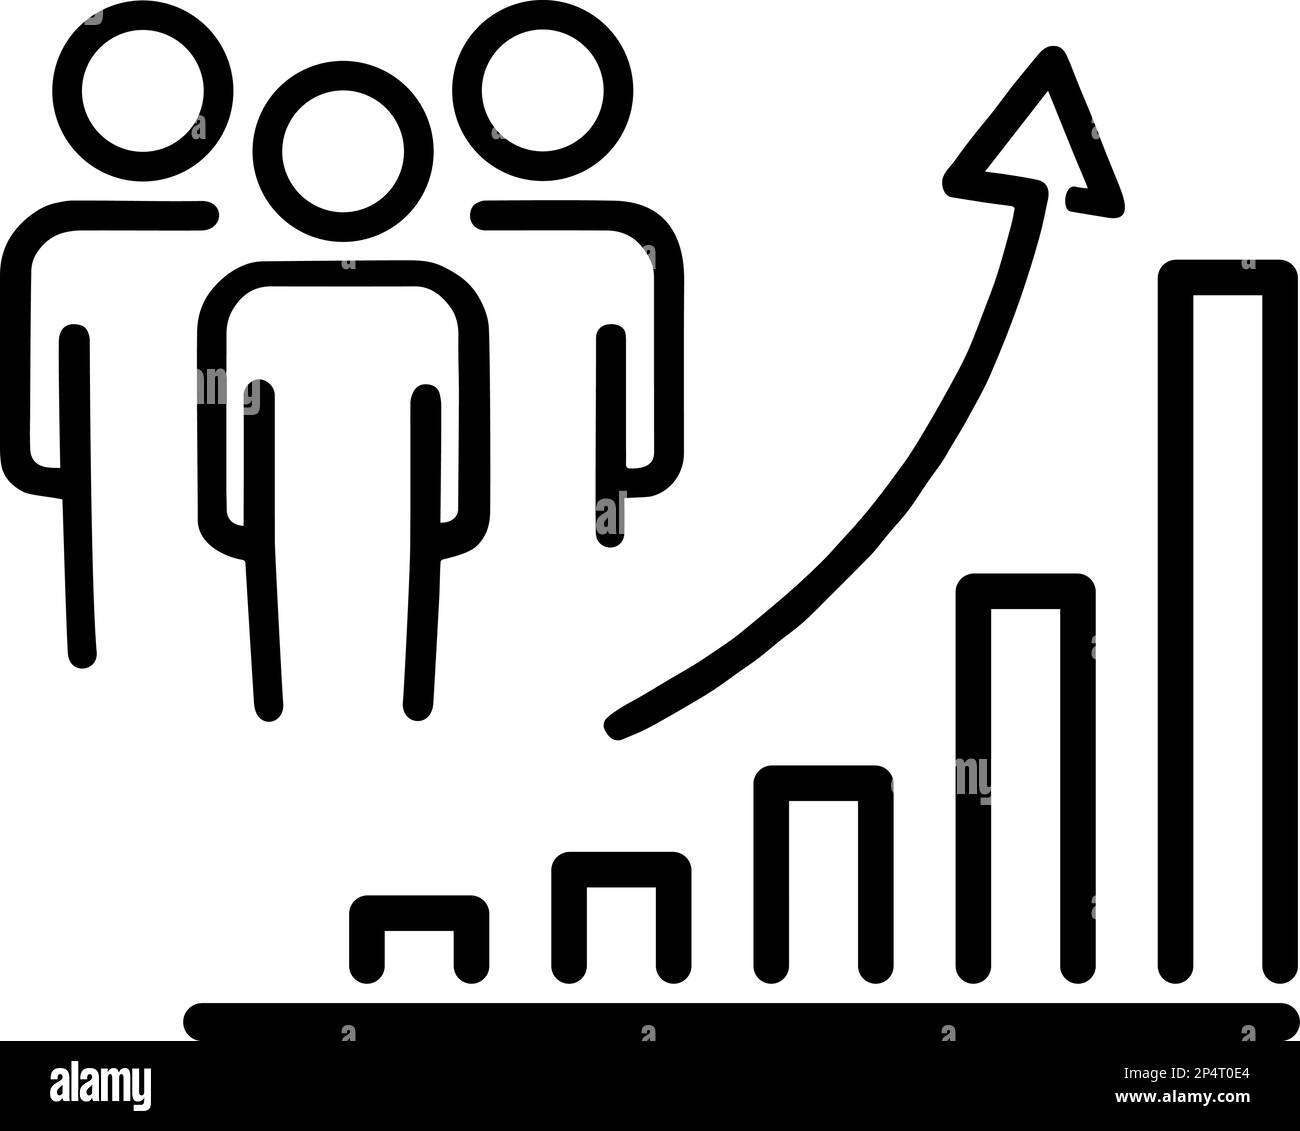 Growth chart icon as a concept of growing career and business Stock Vector